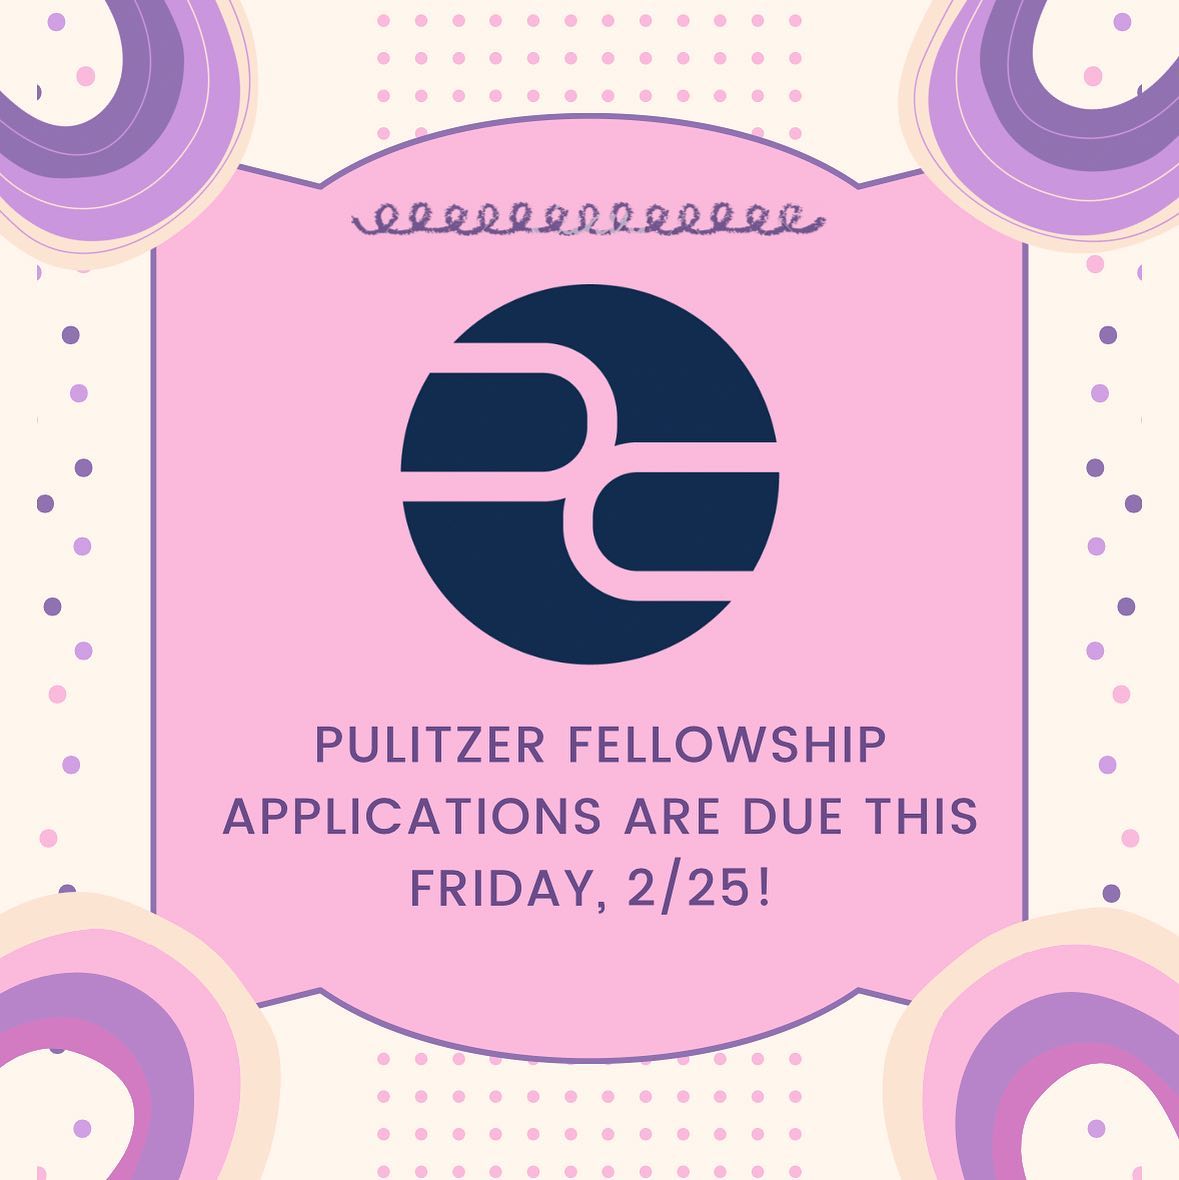 GET YOUR PULITZER FELLOWSHIP APPLICATION IN BEFORE THIS FRIDAY! The Pulitzer Fellowship is a unique and excellent opportunity for budding journalists to explore and hone their talents alongside other fellow journalists. Apply today! #hunterjournpgm #JOURNALISMATHUNTER